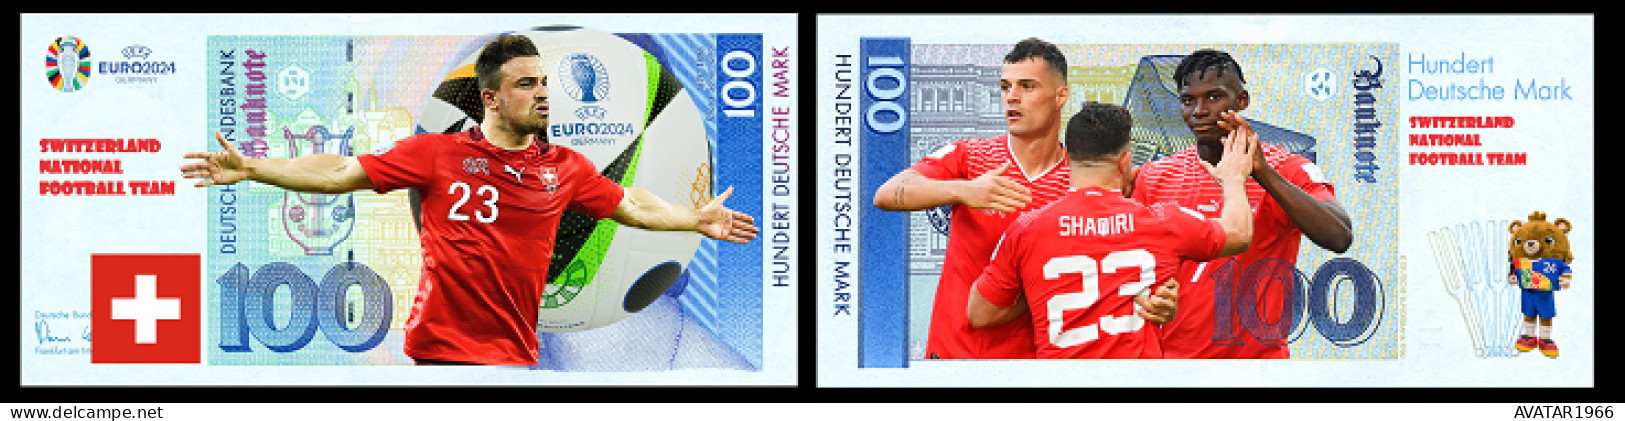 UEFA European Football Championship 2024 qualified country Switzerland 8 pieces Germany fantasy paper money